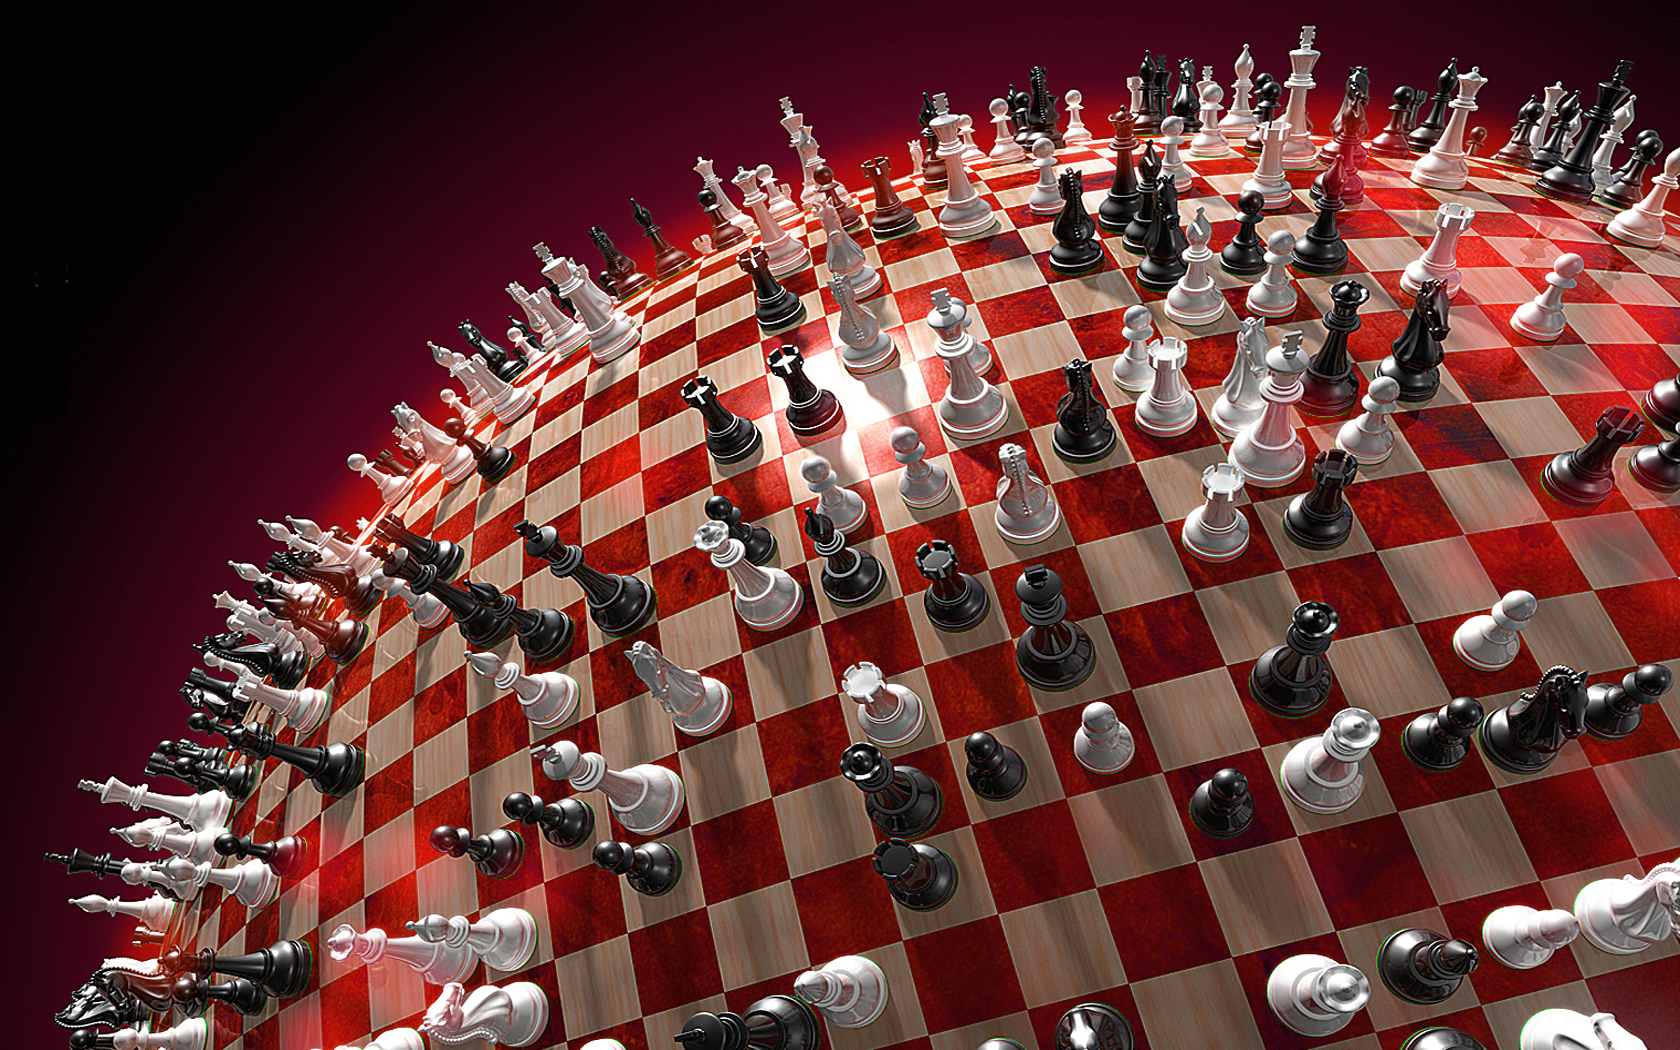 A world of chess